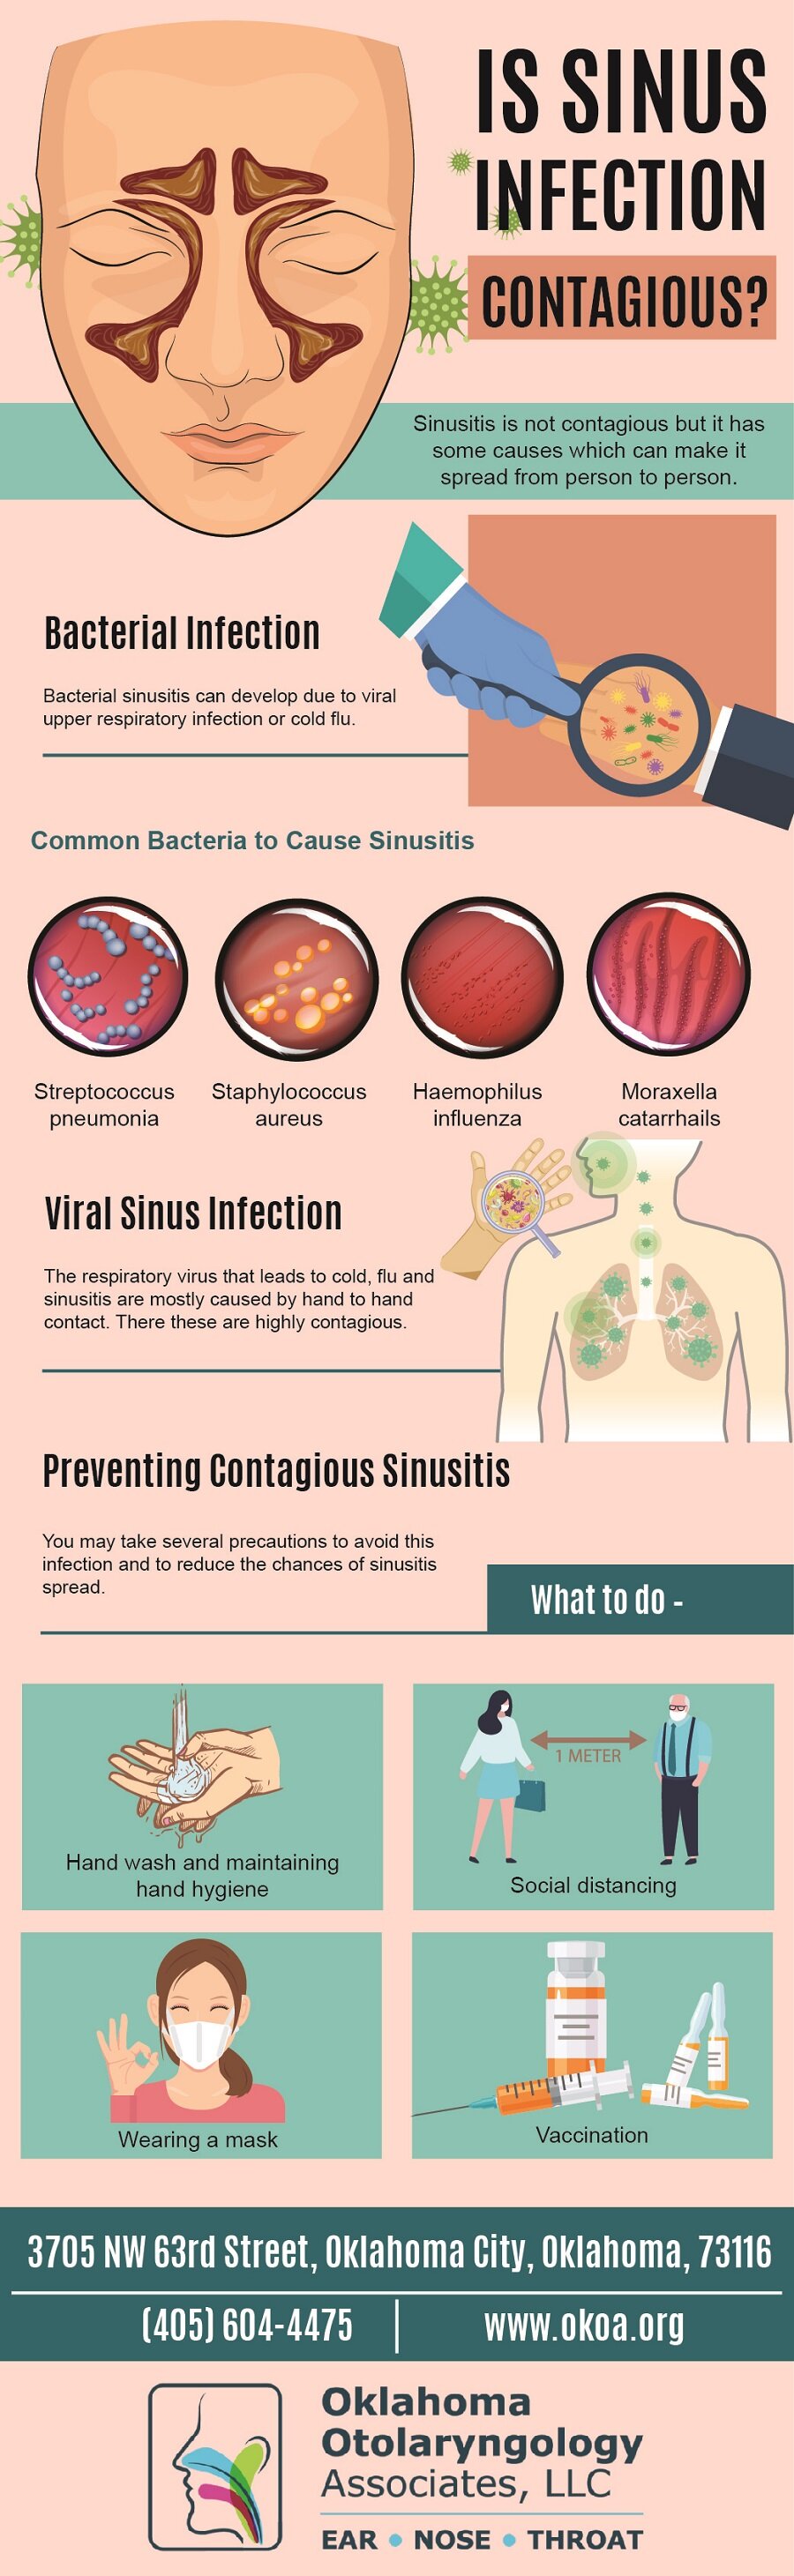 Are sinus infections contagious?